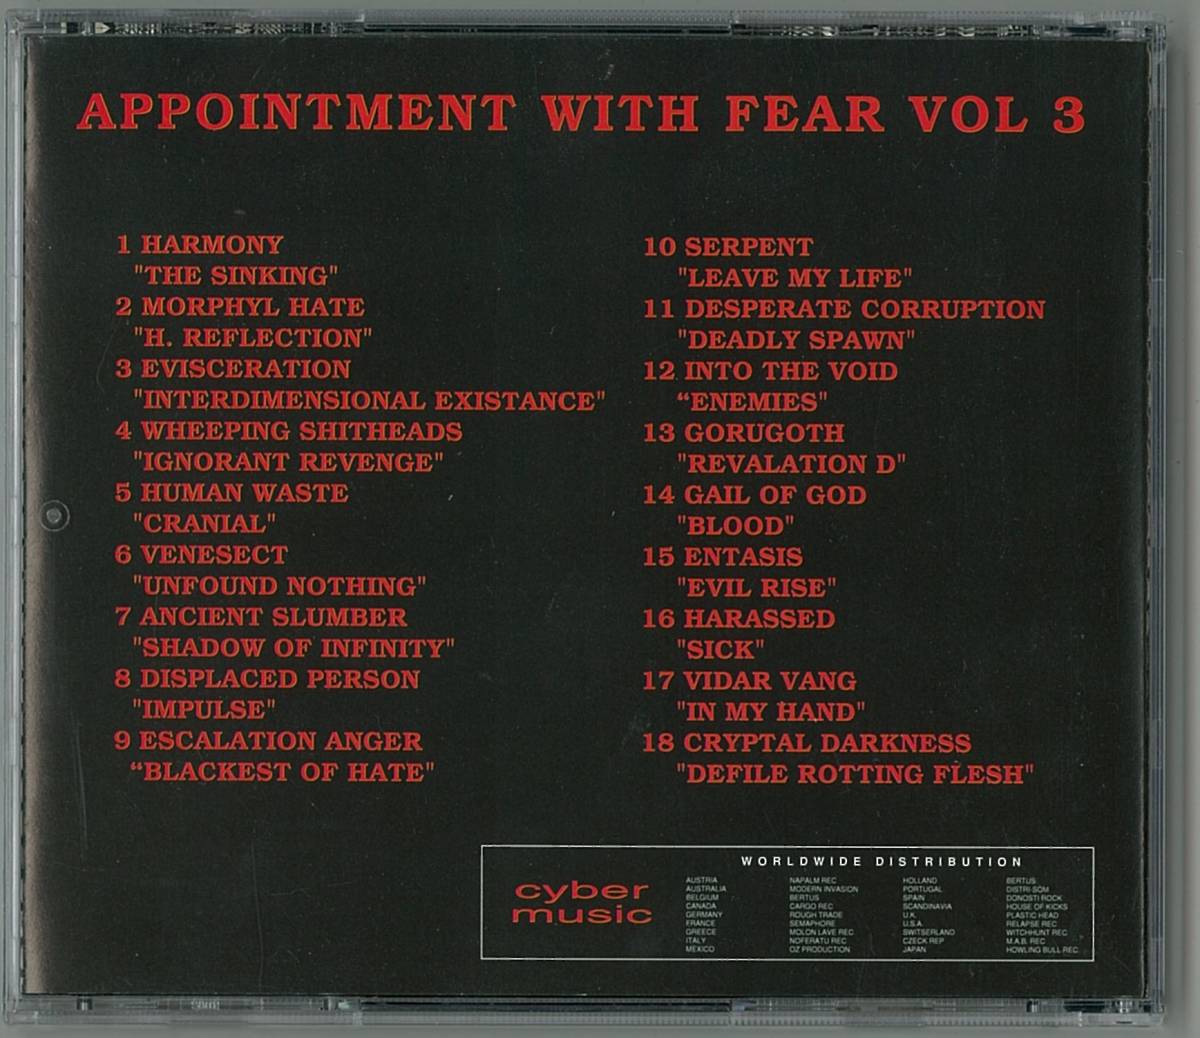 V.A ／ APPOINTMENT WITH FEAR　Vol.3　輸入盤ＣＤ　HUMAN WASTE　他　　検～ grind morbid angel napalm death carcass deicide obituary_画像2